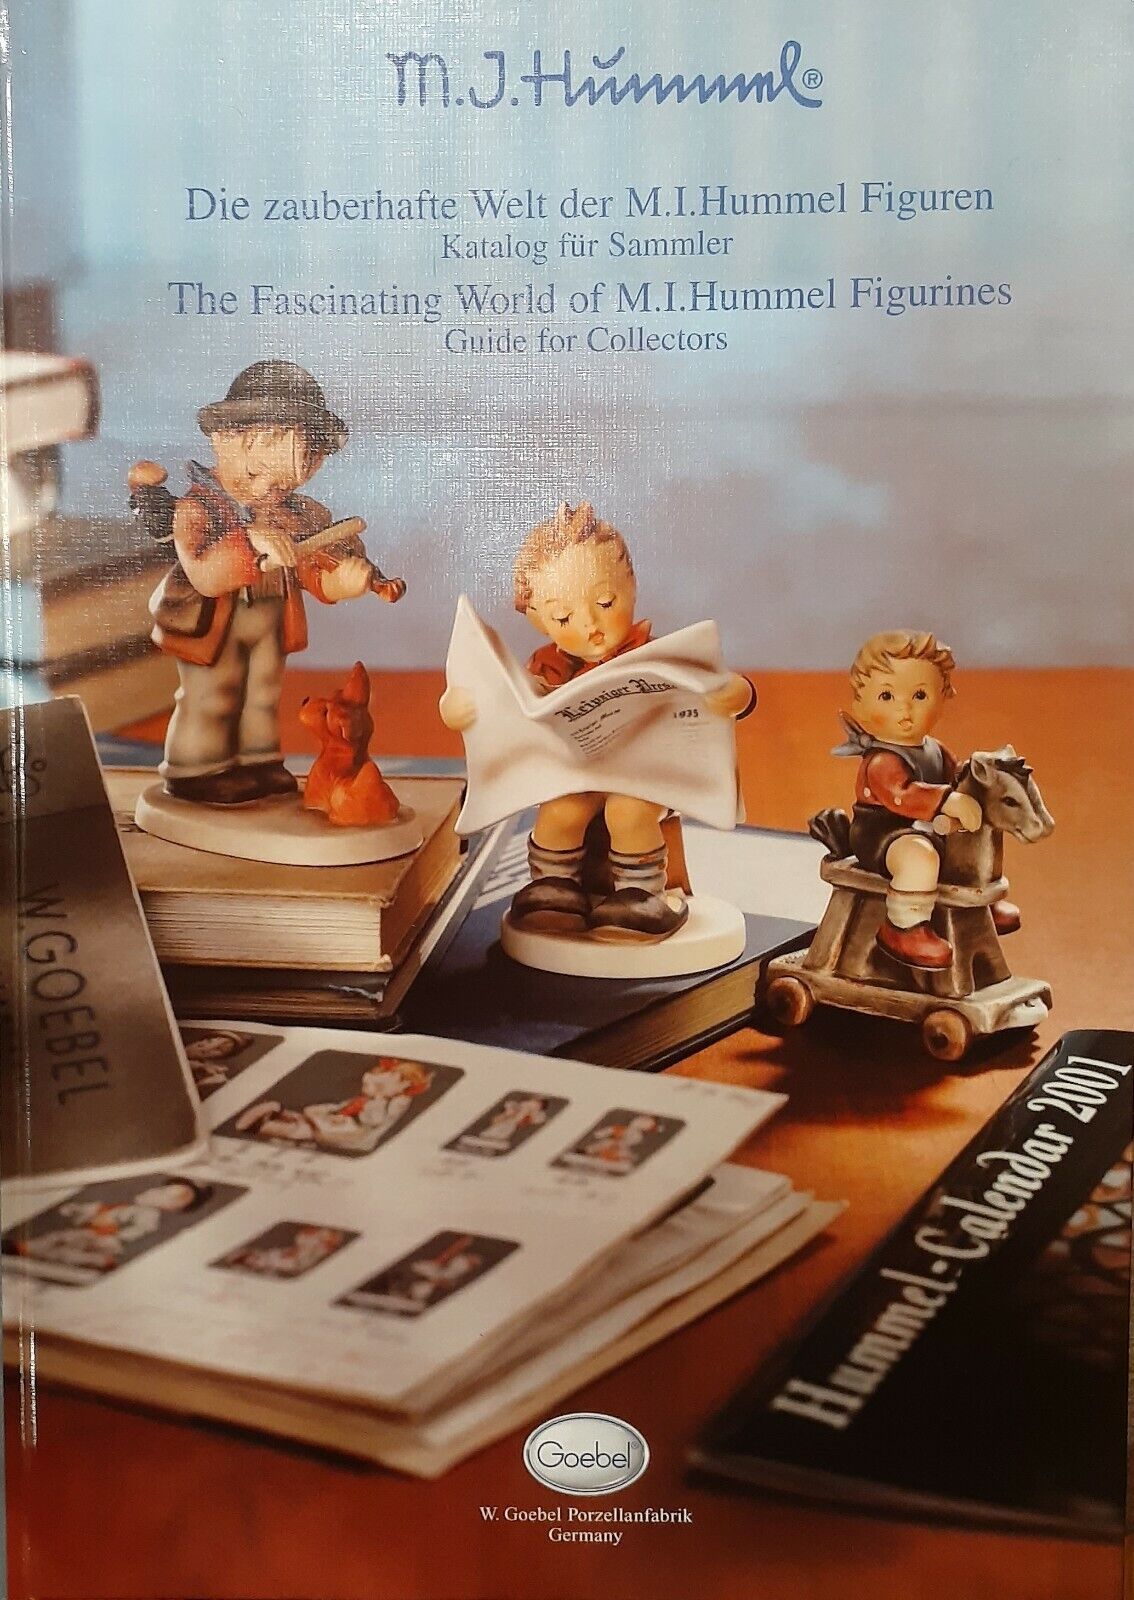 Fascinating World of M.I. Hummel Figurines: Guide for Collectors (C) 2000